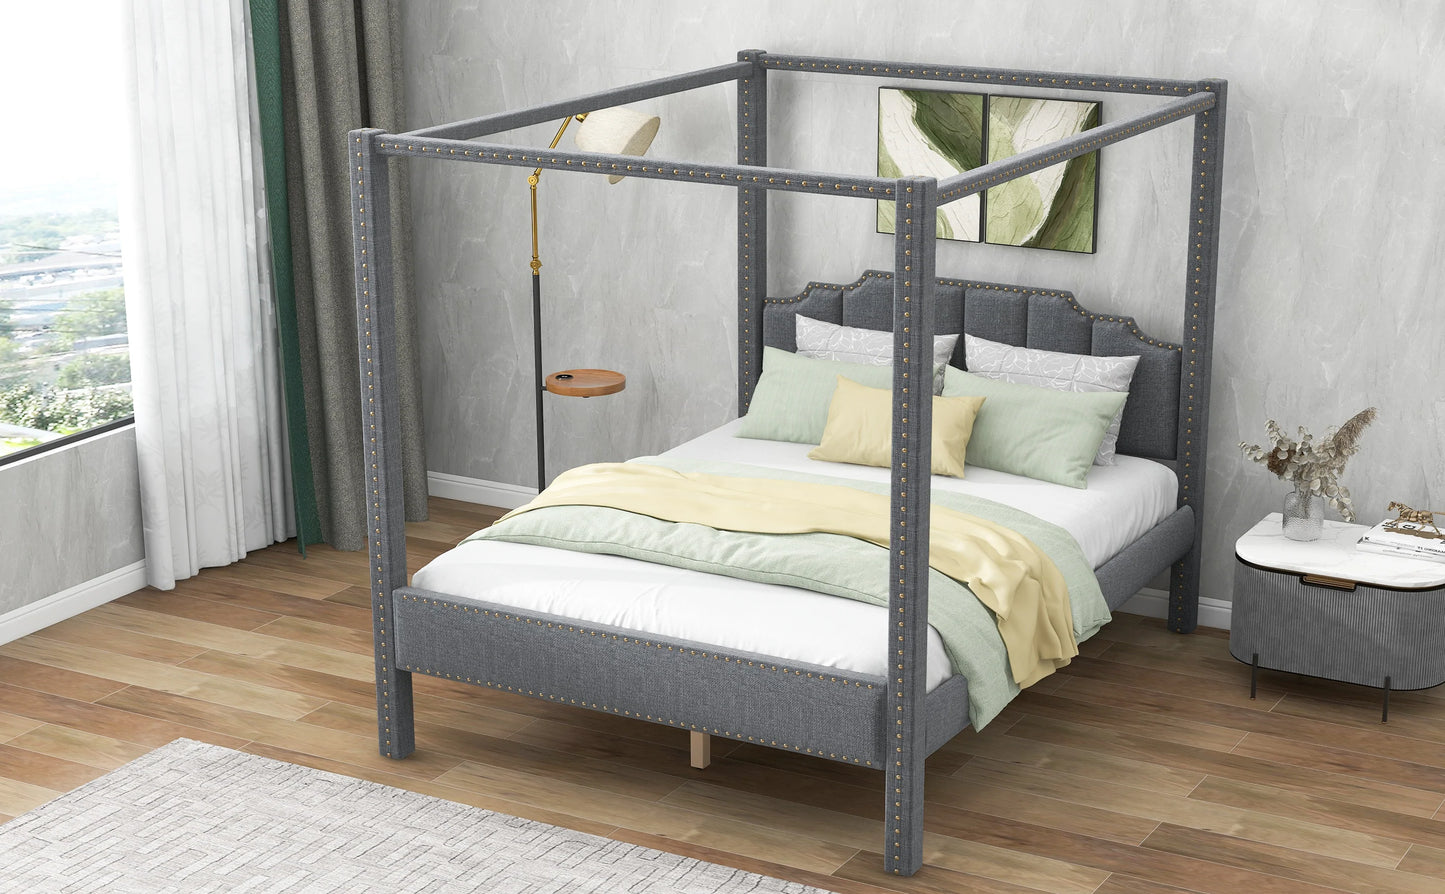 Upholstery Canopy Platform Bed Headboard Support Legs in Gray